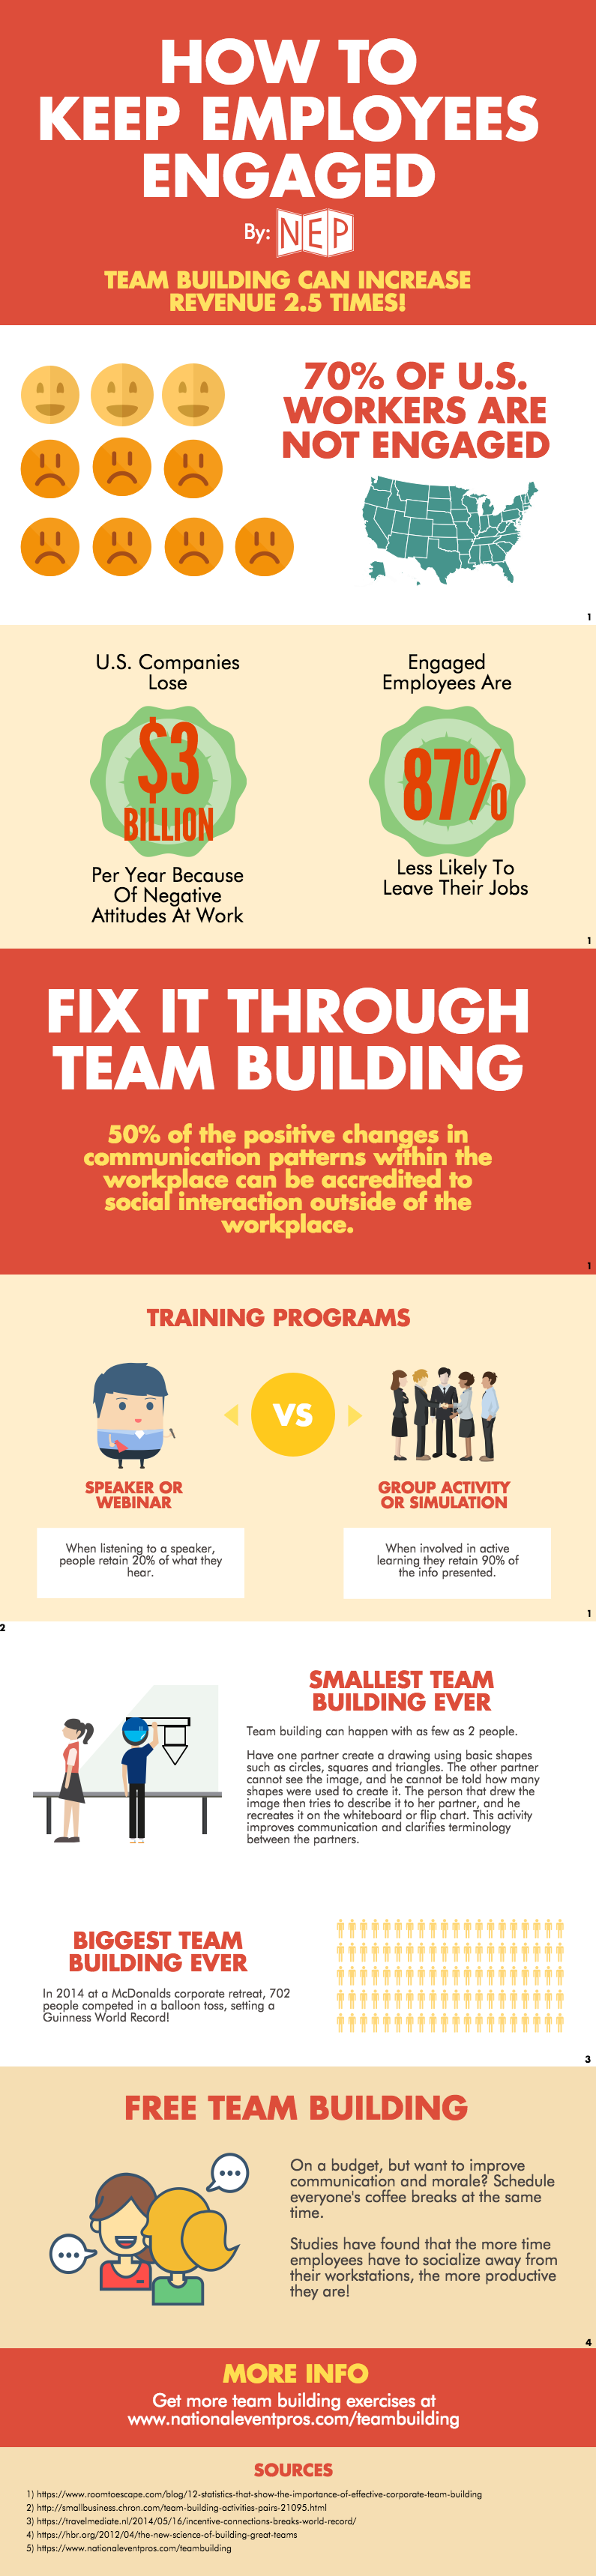 Infographic: The Importance Of Team Building